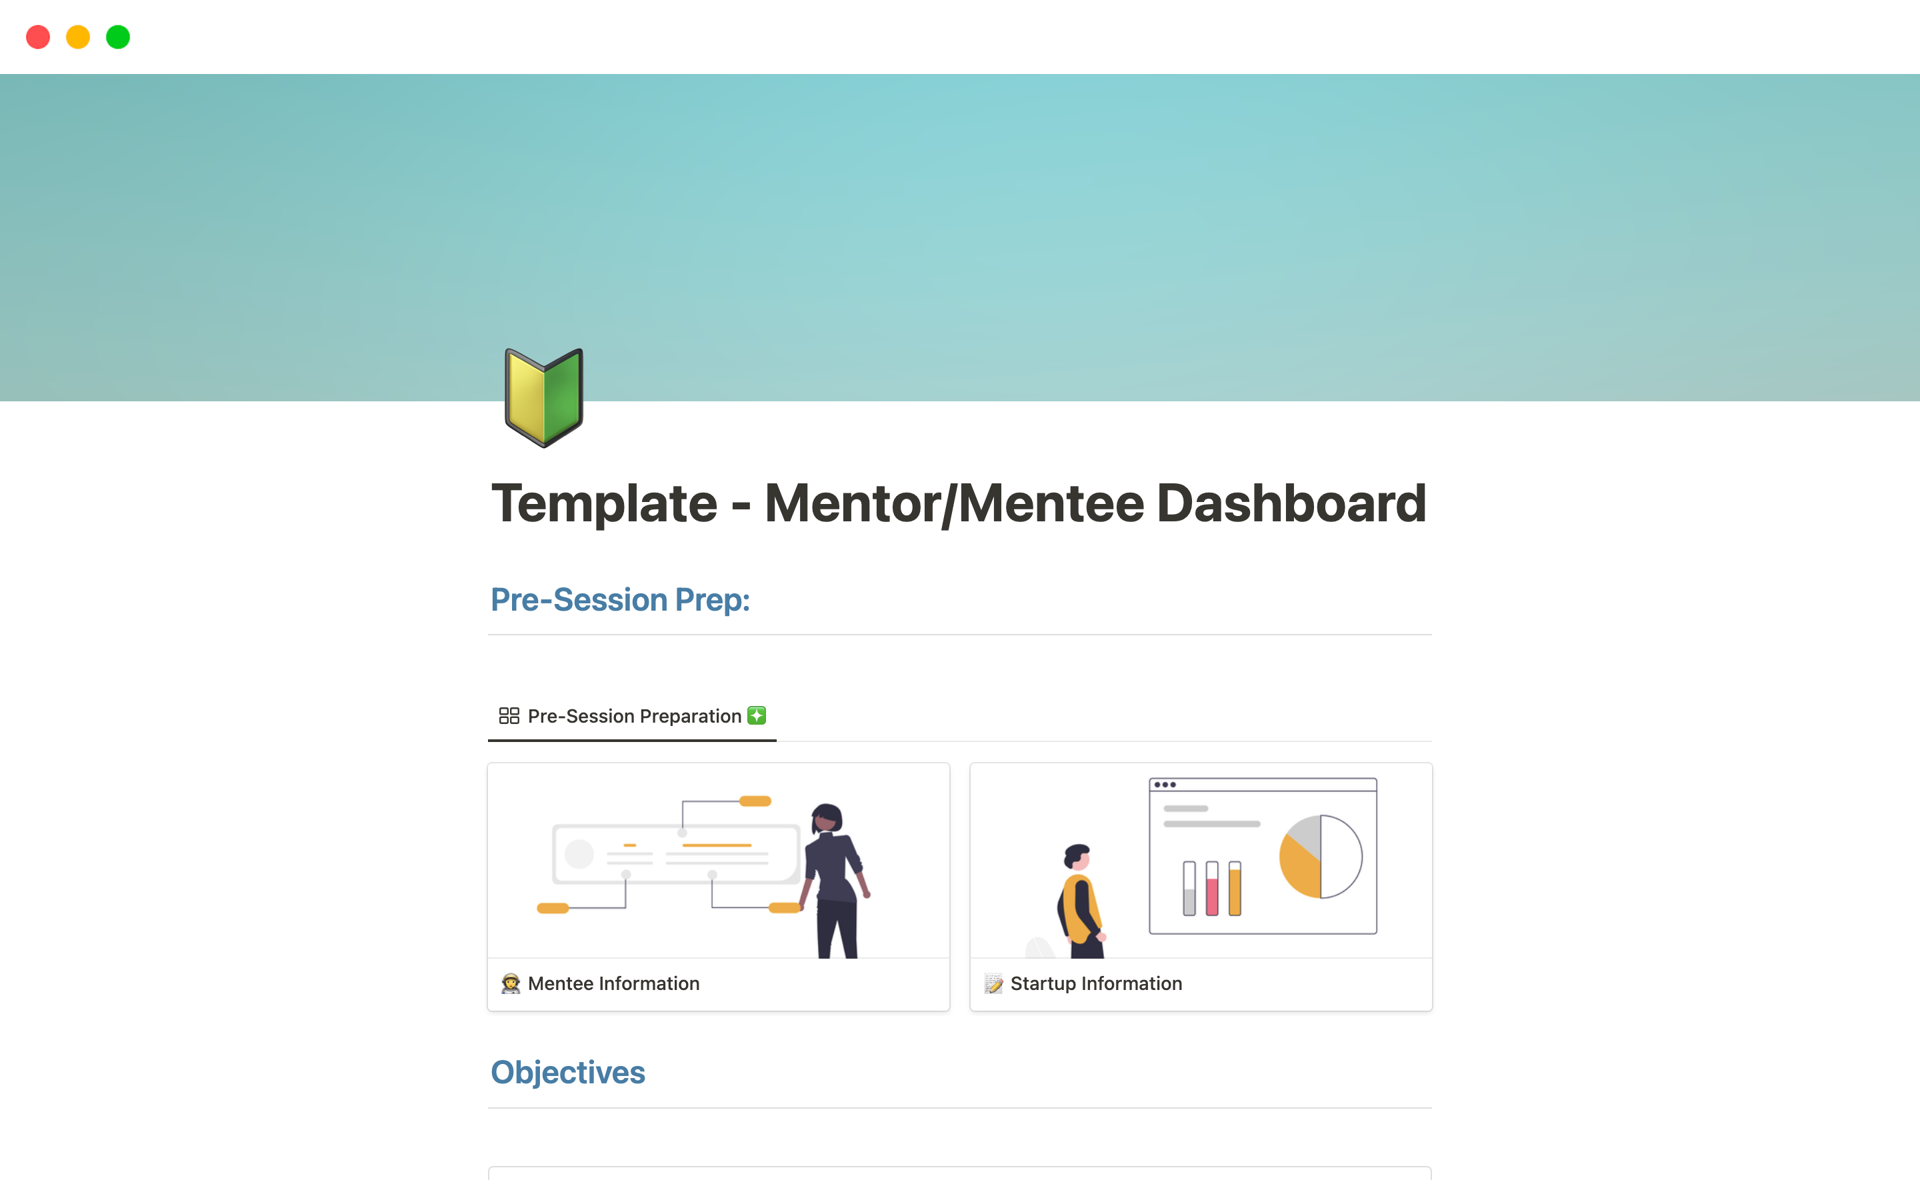 Streamline your mentorship sessions with this comprehensive template for goal setting, challenge identification, and progress tracking.